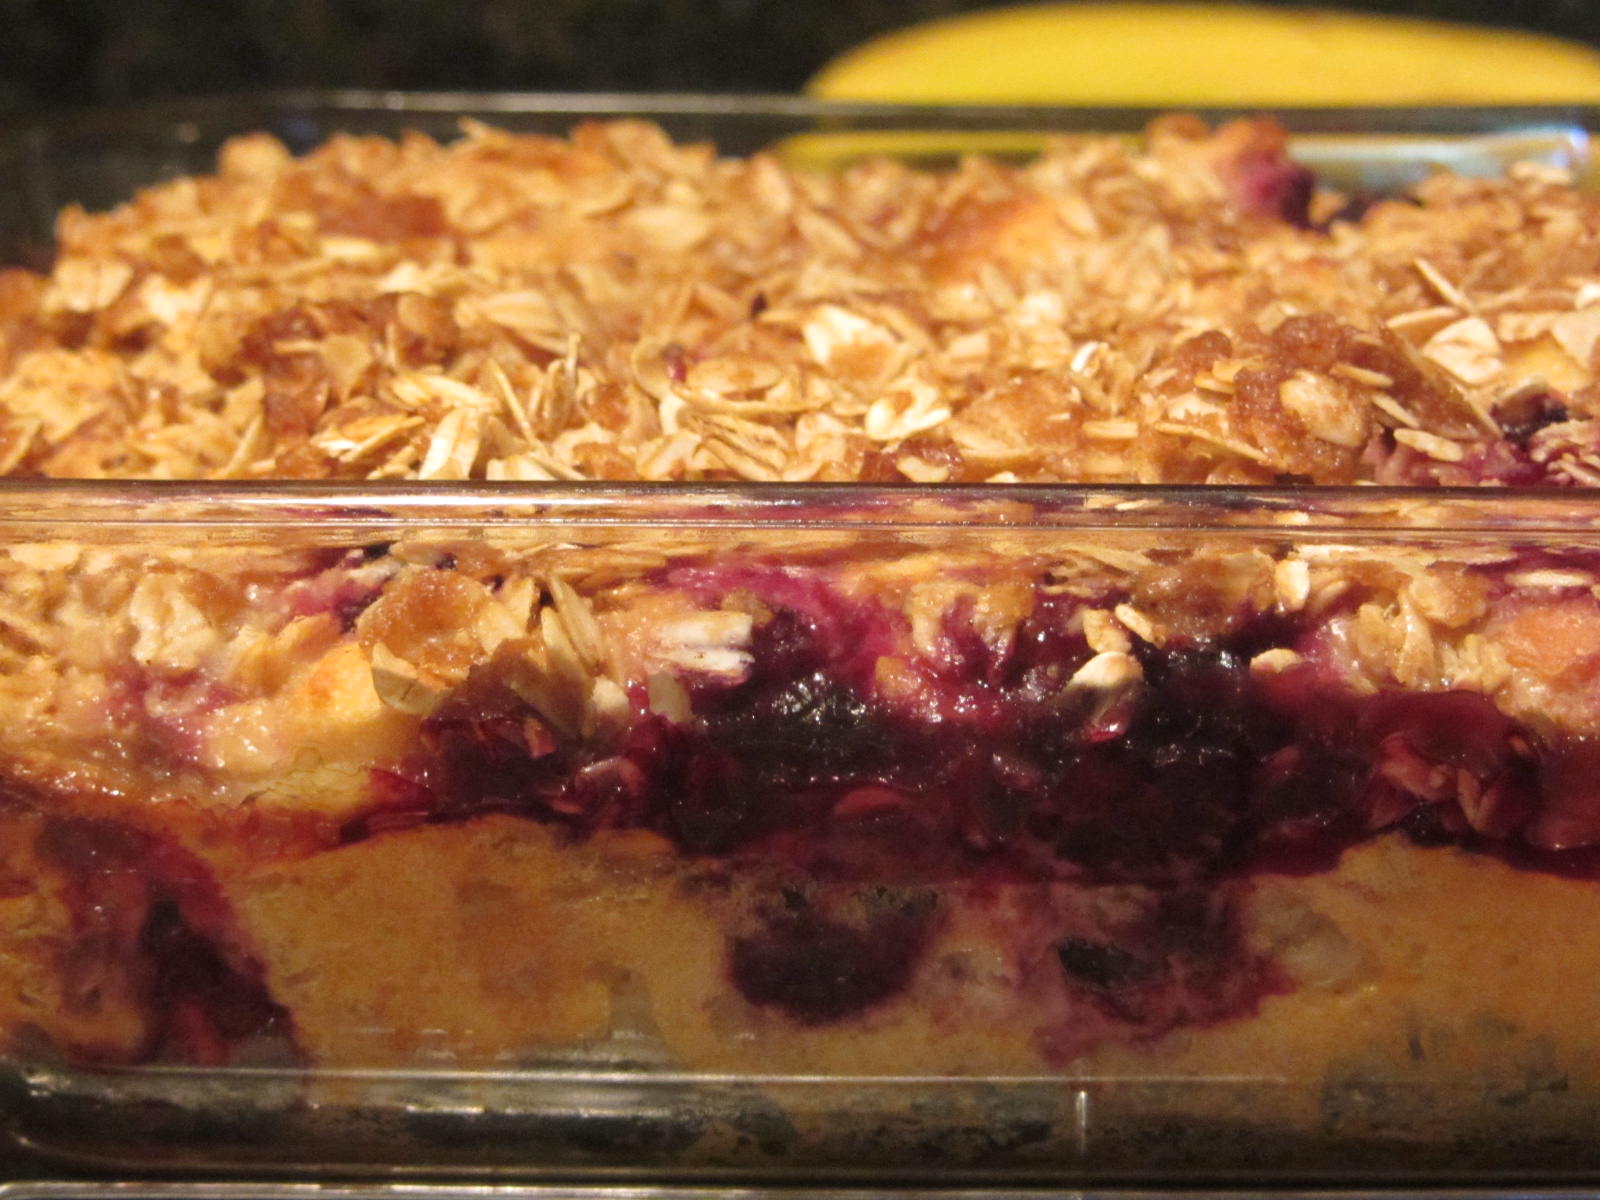 French Toast Casserole with Berries